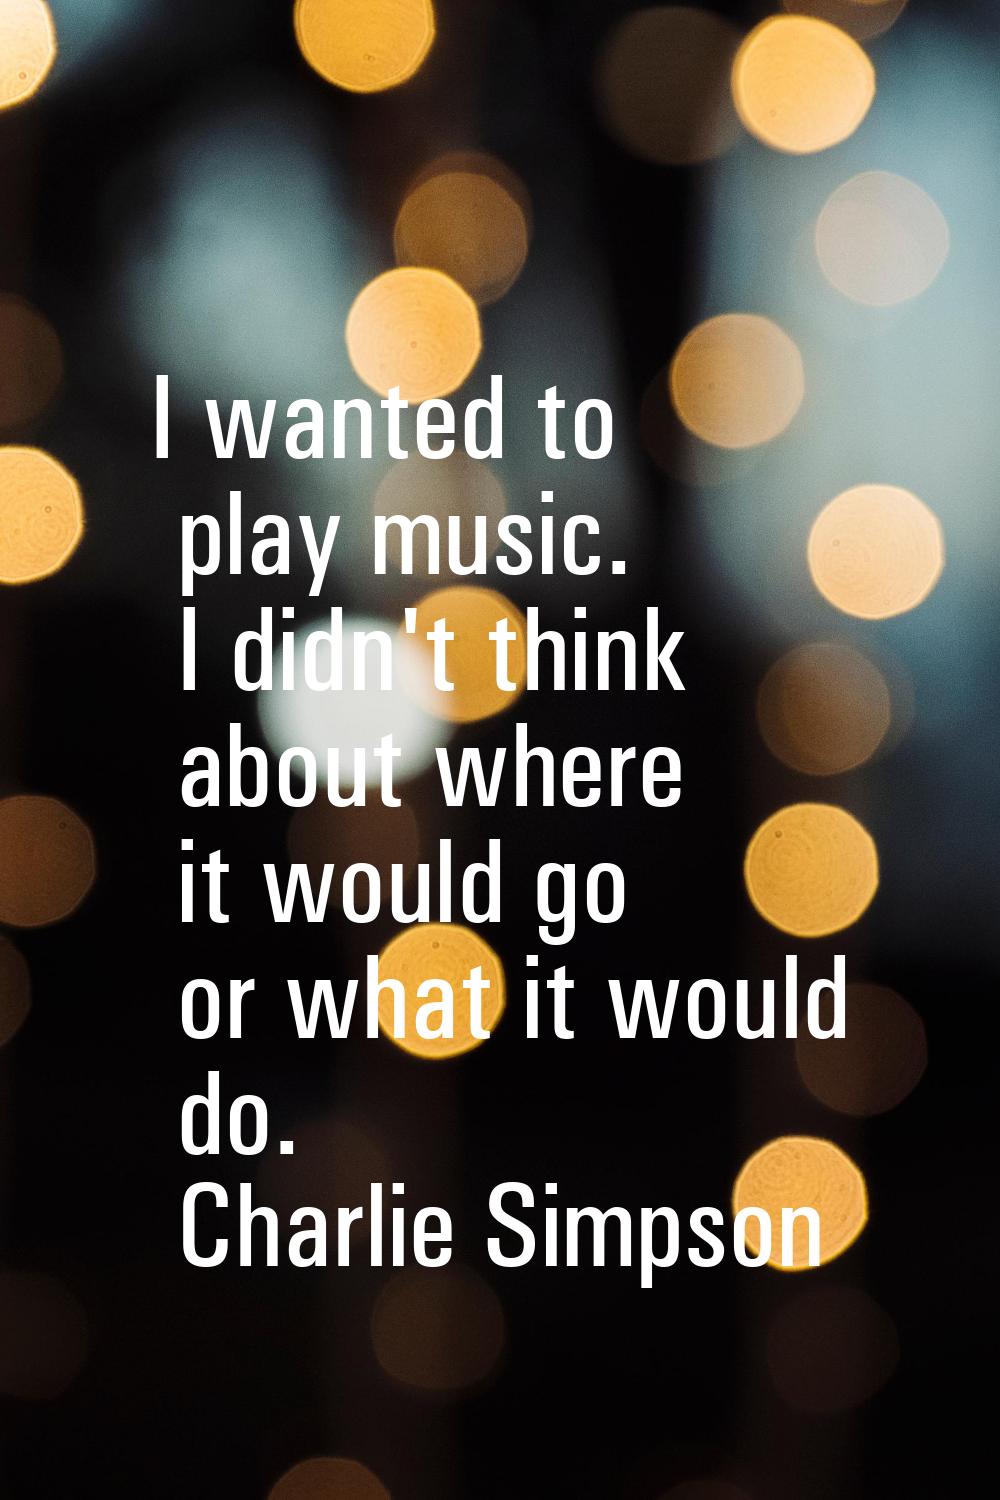 I wanted to play music. I didn't think about where it would go or what it would do.